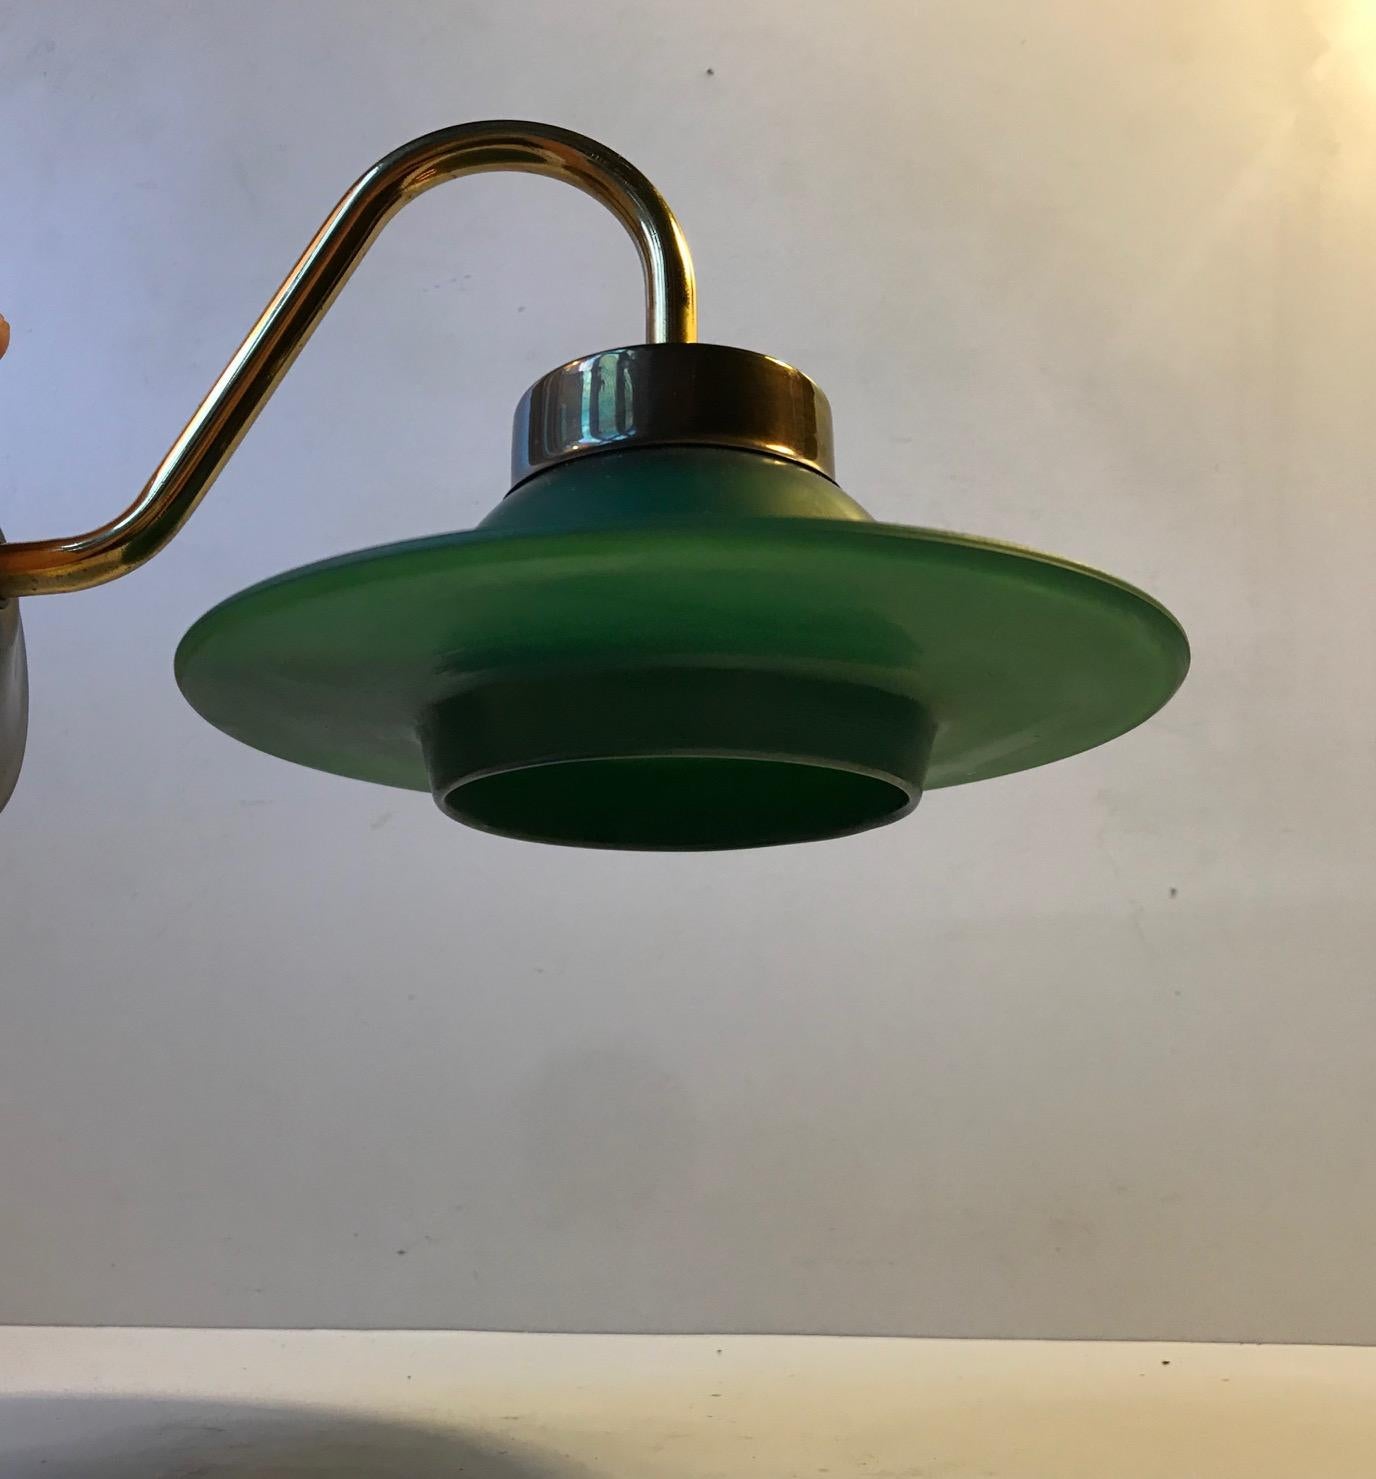 Up or downwards wall light made from solid brass. It has a Saturn / orbit shaped shade in green glass. Anonymous Scandinavian design/maker, circa 1960.